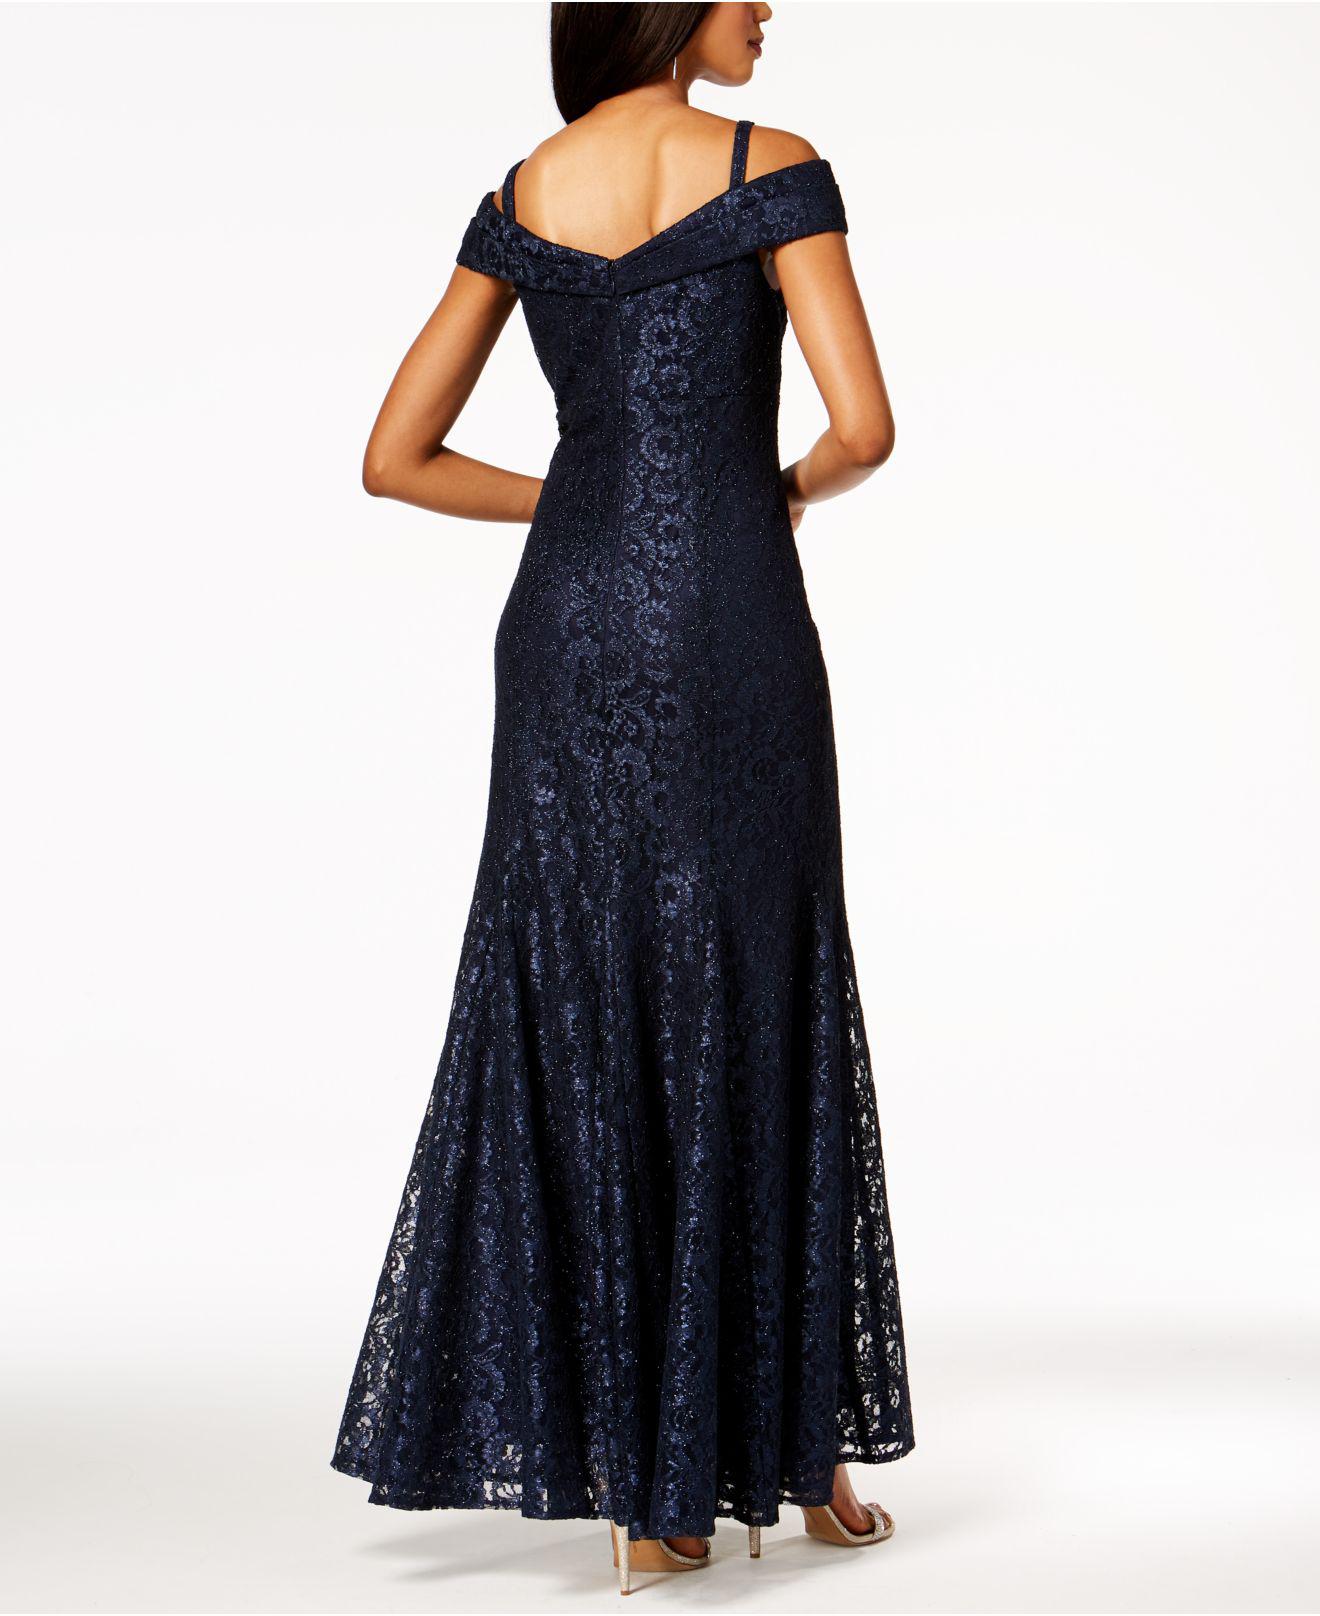 R & M Richards Off-the-shoulder Lace Gown in Navy (Blue) - Lyst